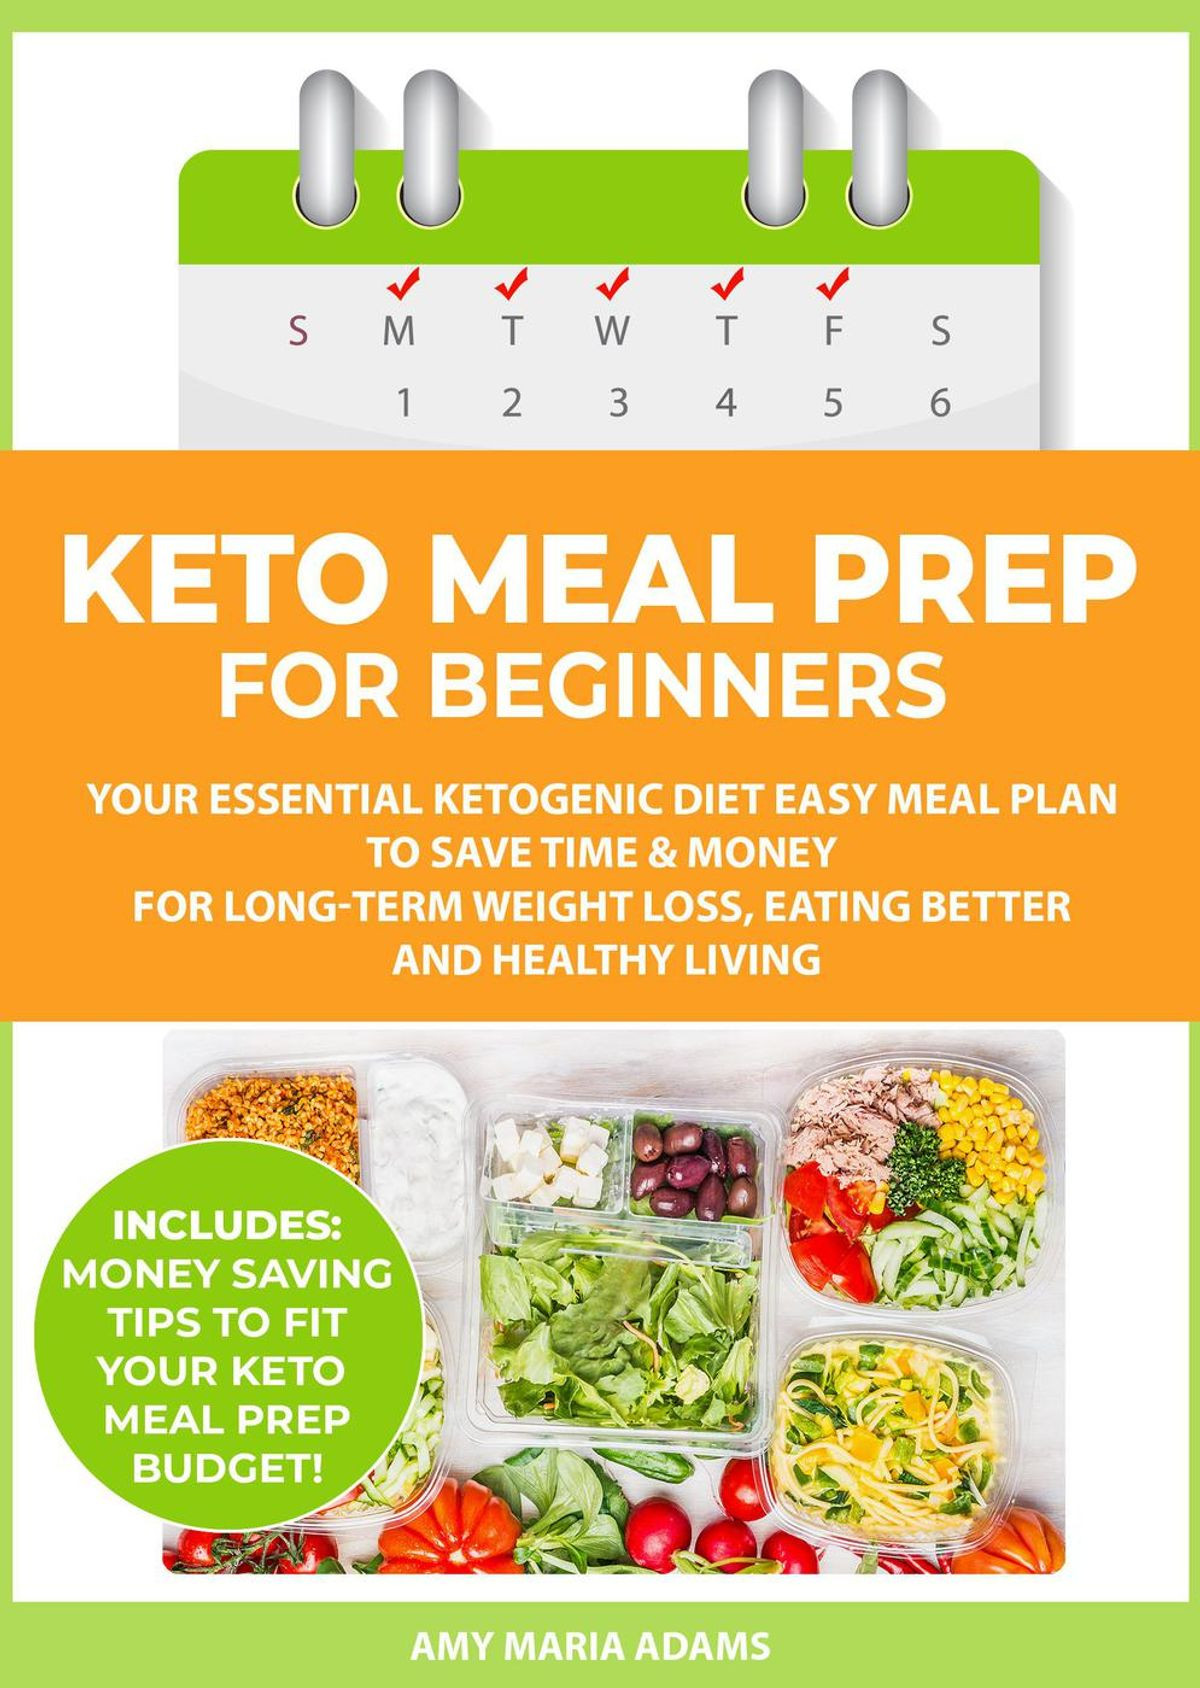 Healthy Keto Diet For Beginners
 Keto Meal Prep for Beginners Your Essential Ketogenic